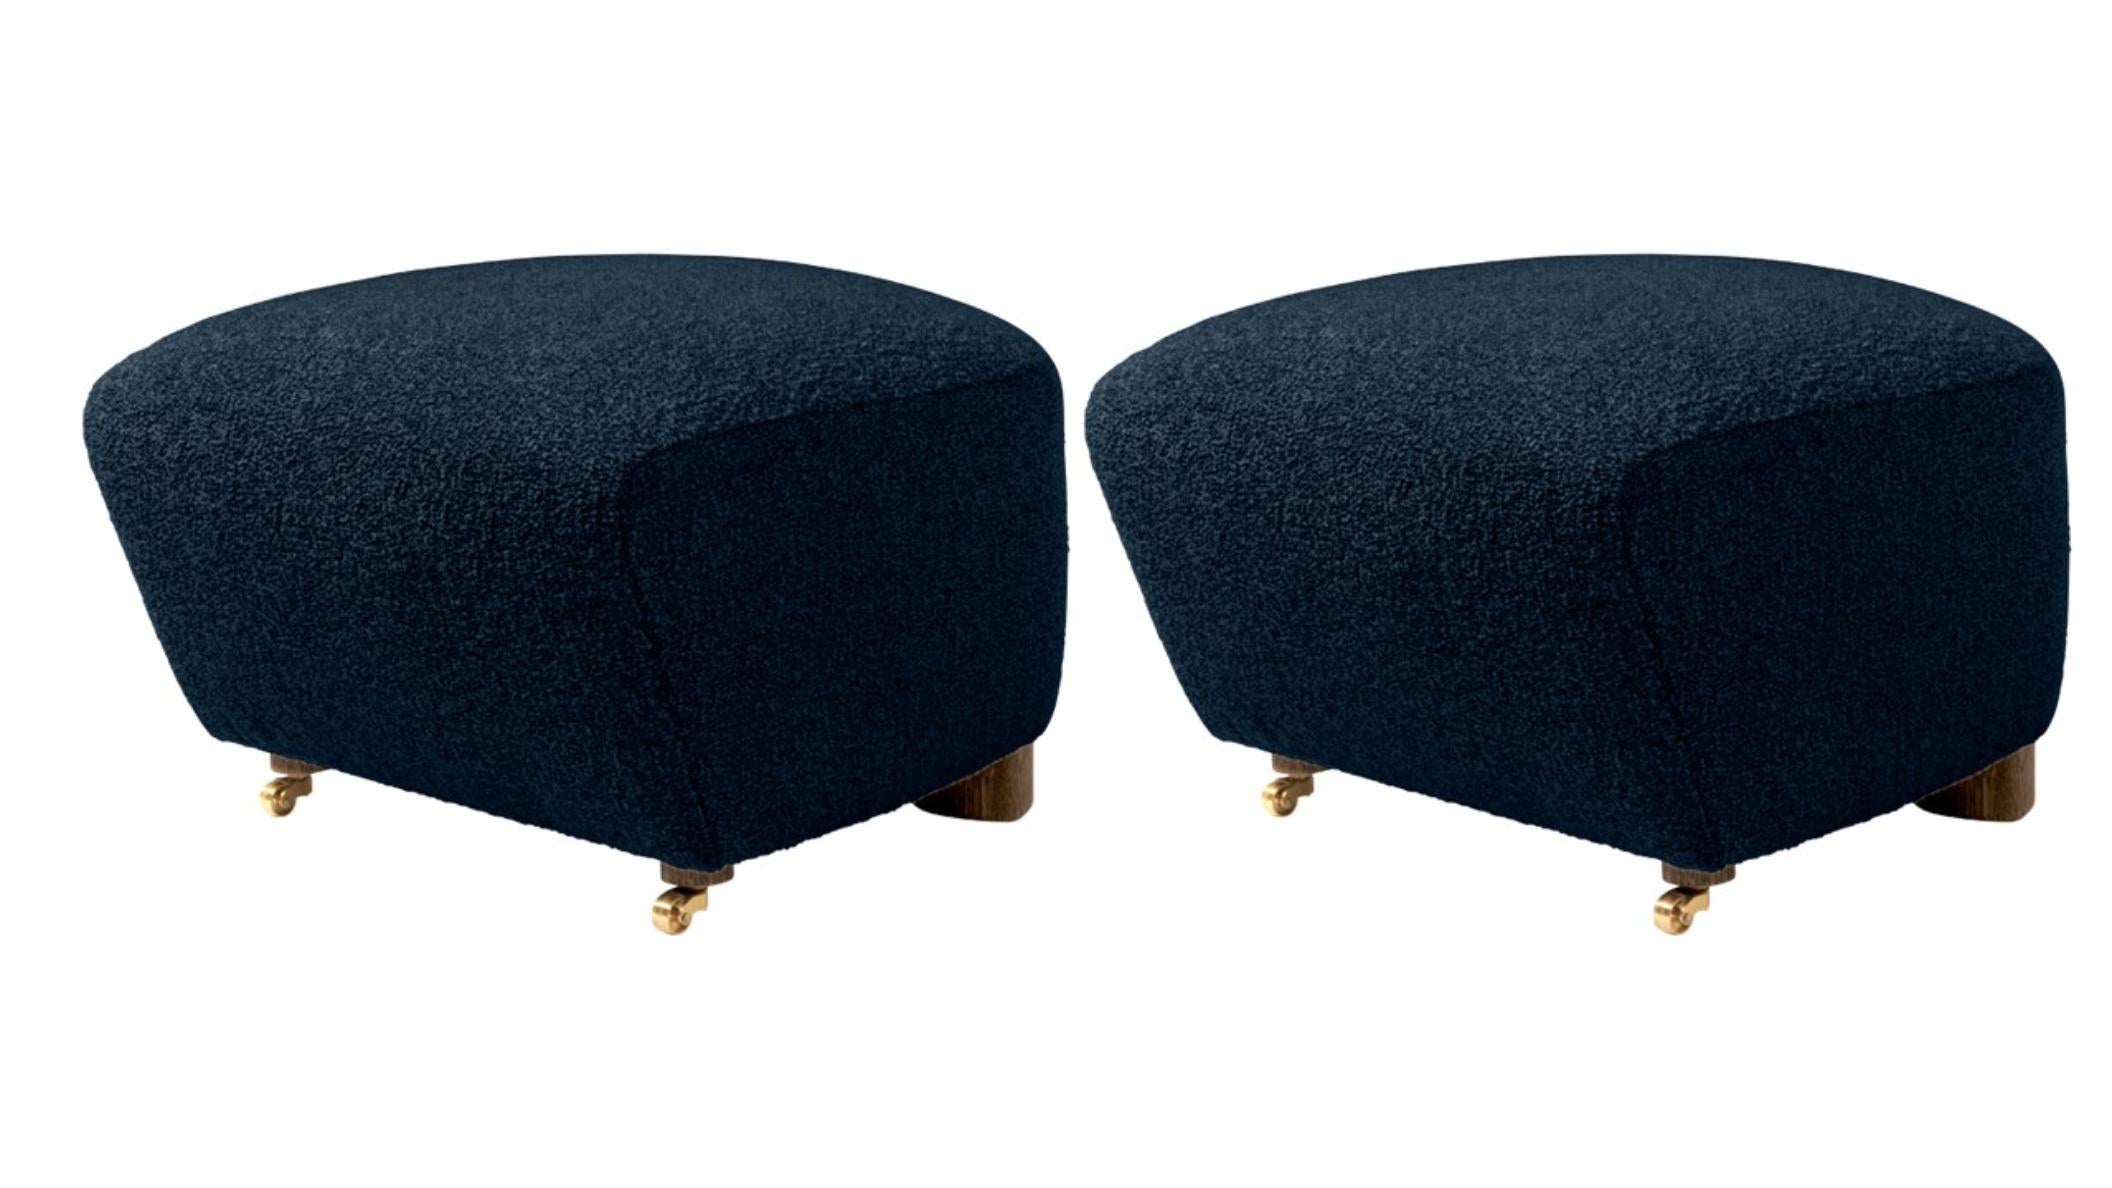 Set of 2 blue smoked oak Sahco zero the tired man footstools by Lassen
Dimensions: W 55 x D 53 x H 36 cm 
Materials: textile

Flemming Lassen designed the overstuffed easy chair, The Tired Man, for The Copenhagen Cabinetmakers’ Guild Competition